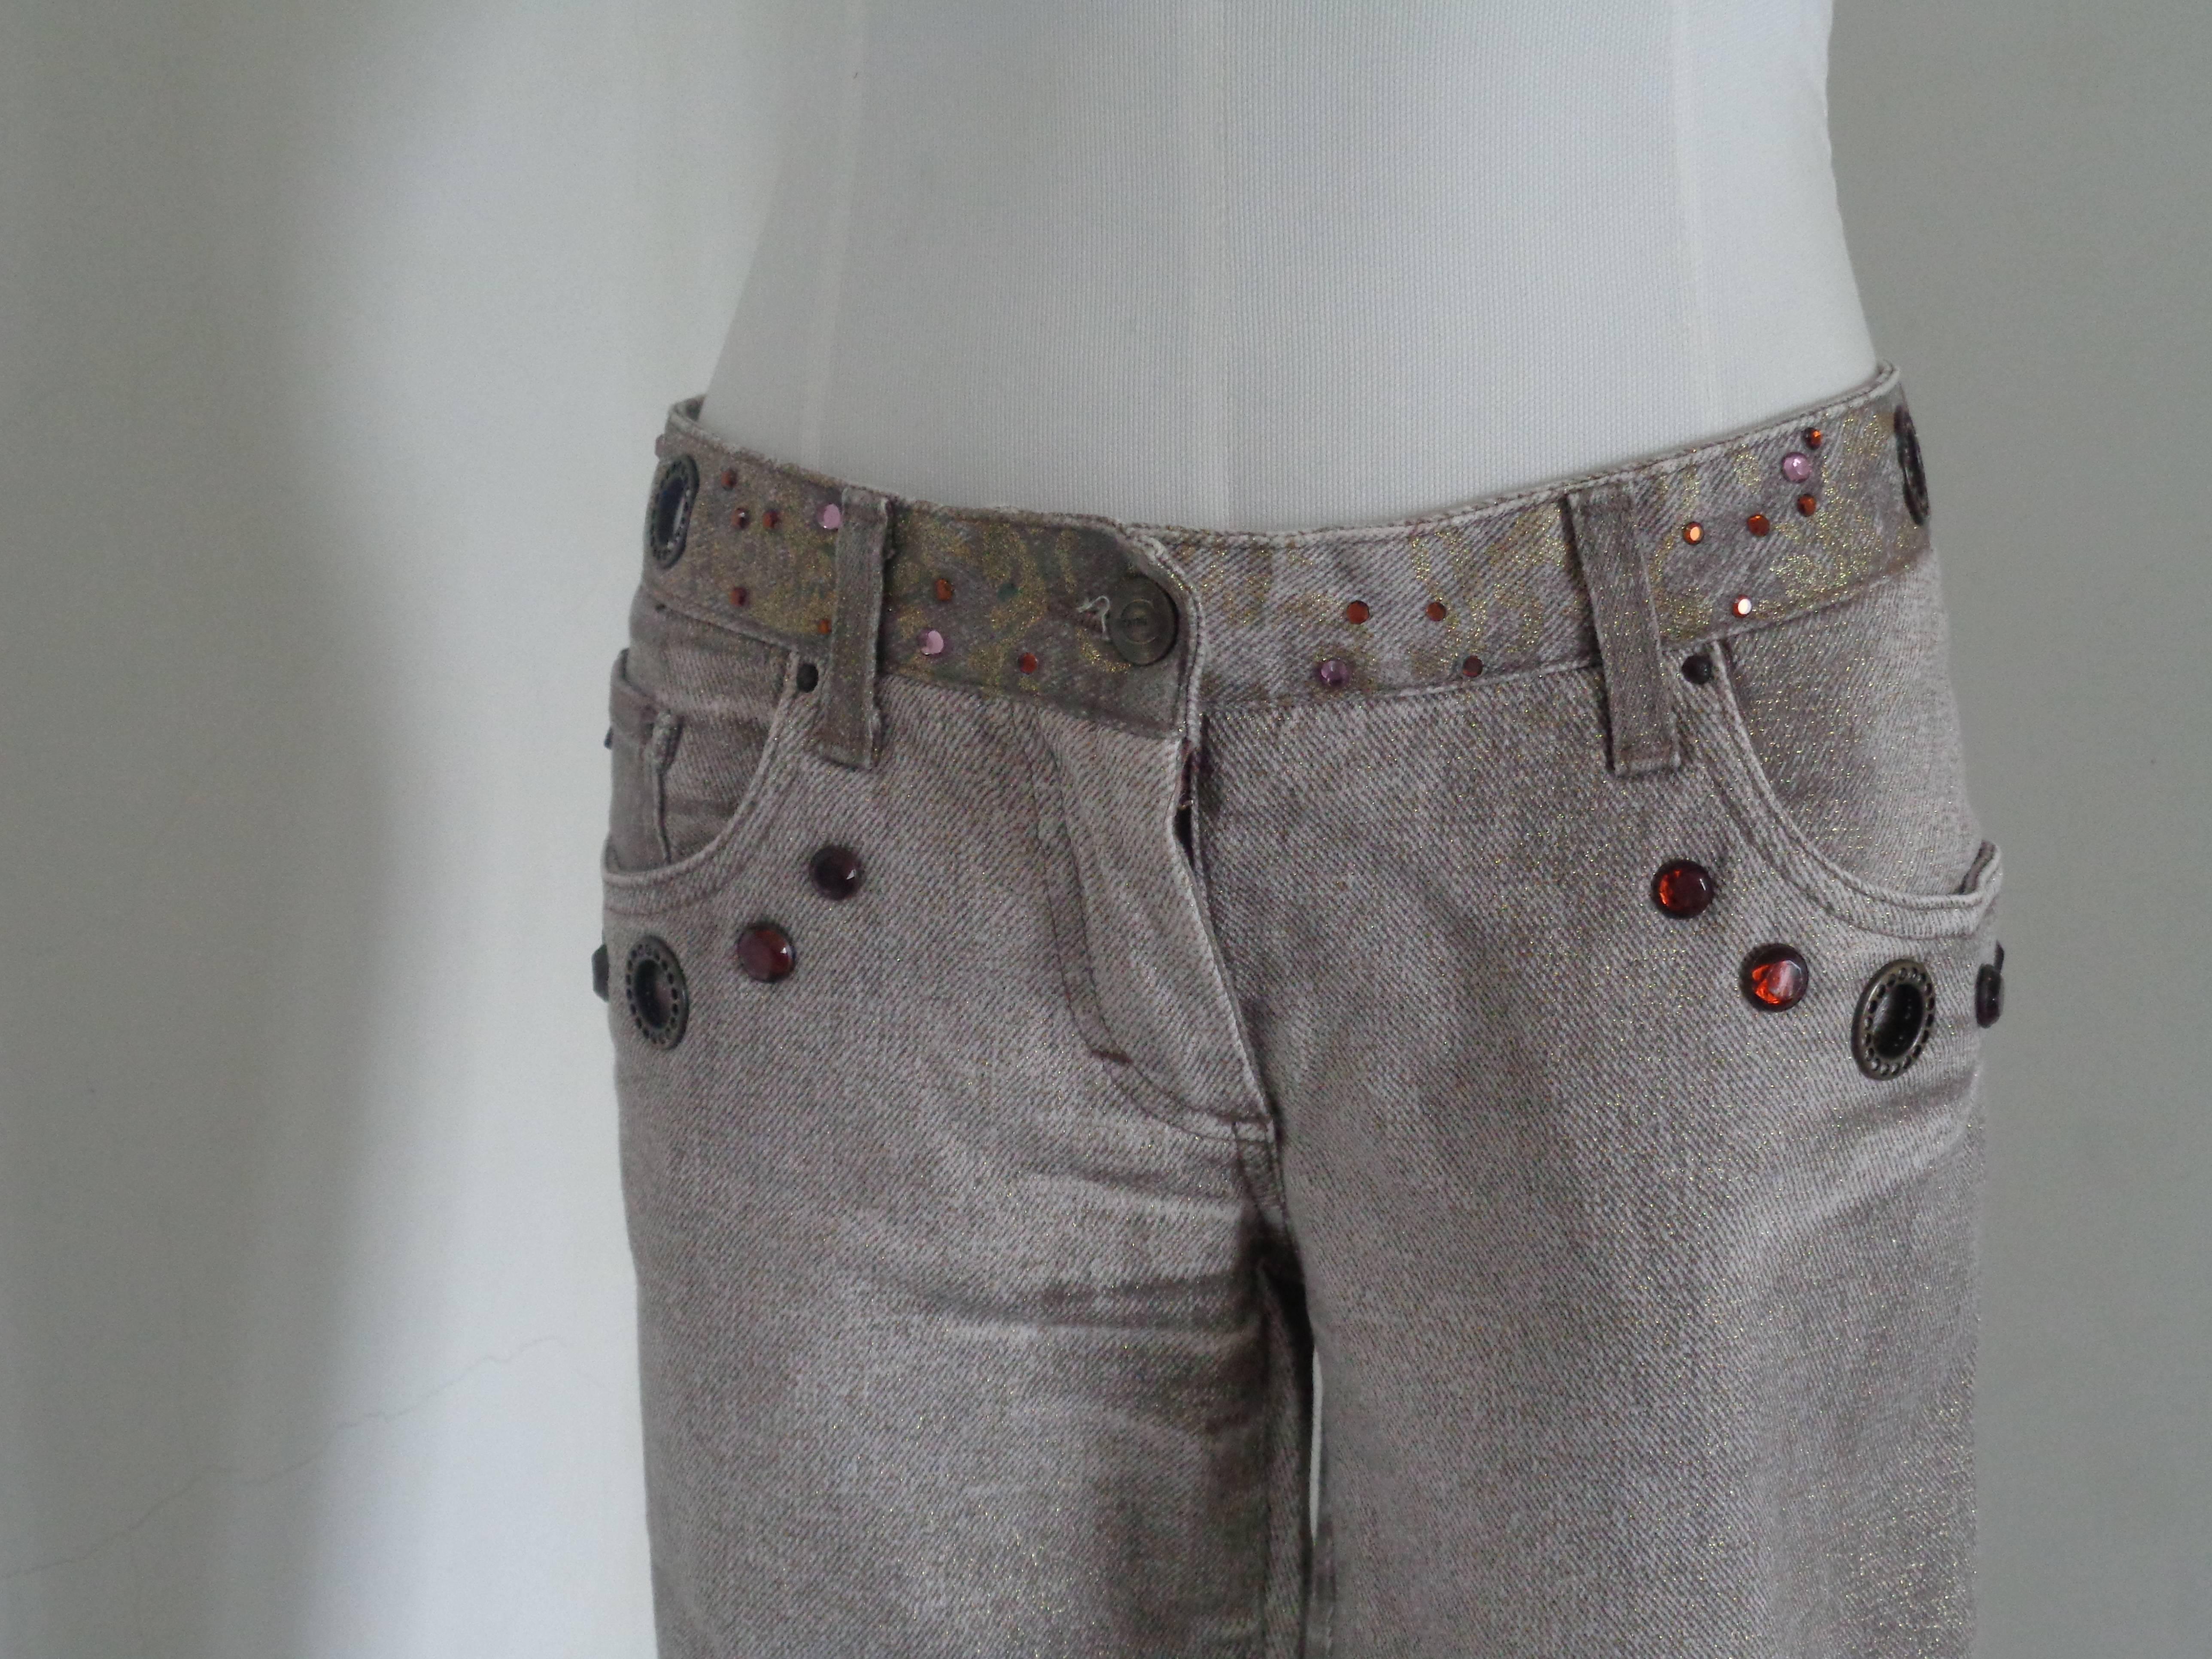 Roberto Cavalli Grey Brown with studs Denim Pants
Totally made in italy in size M 